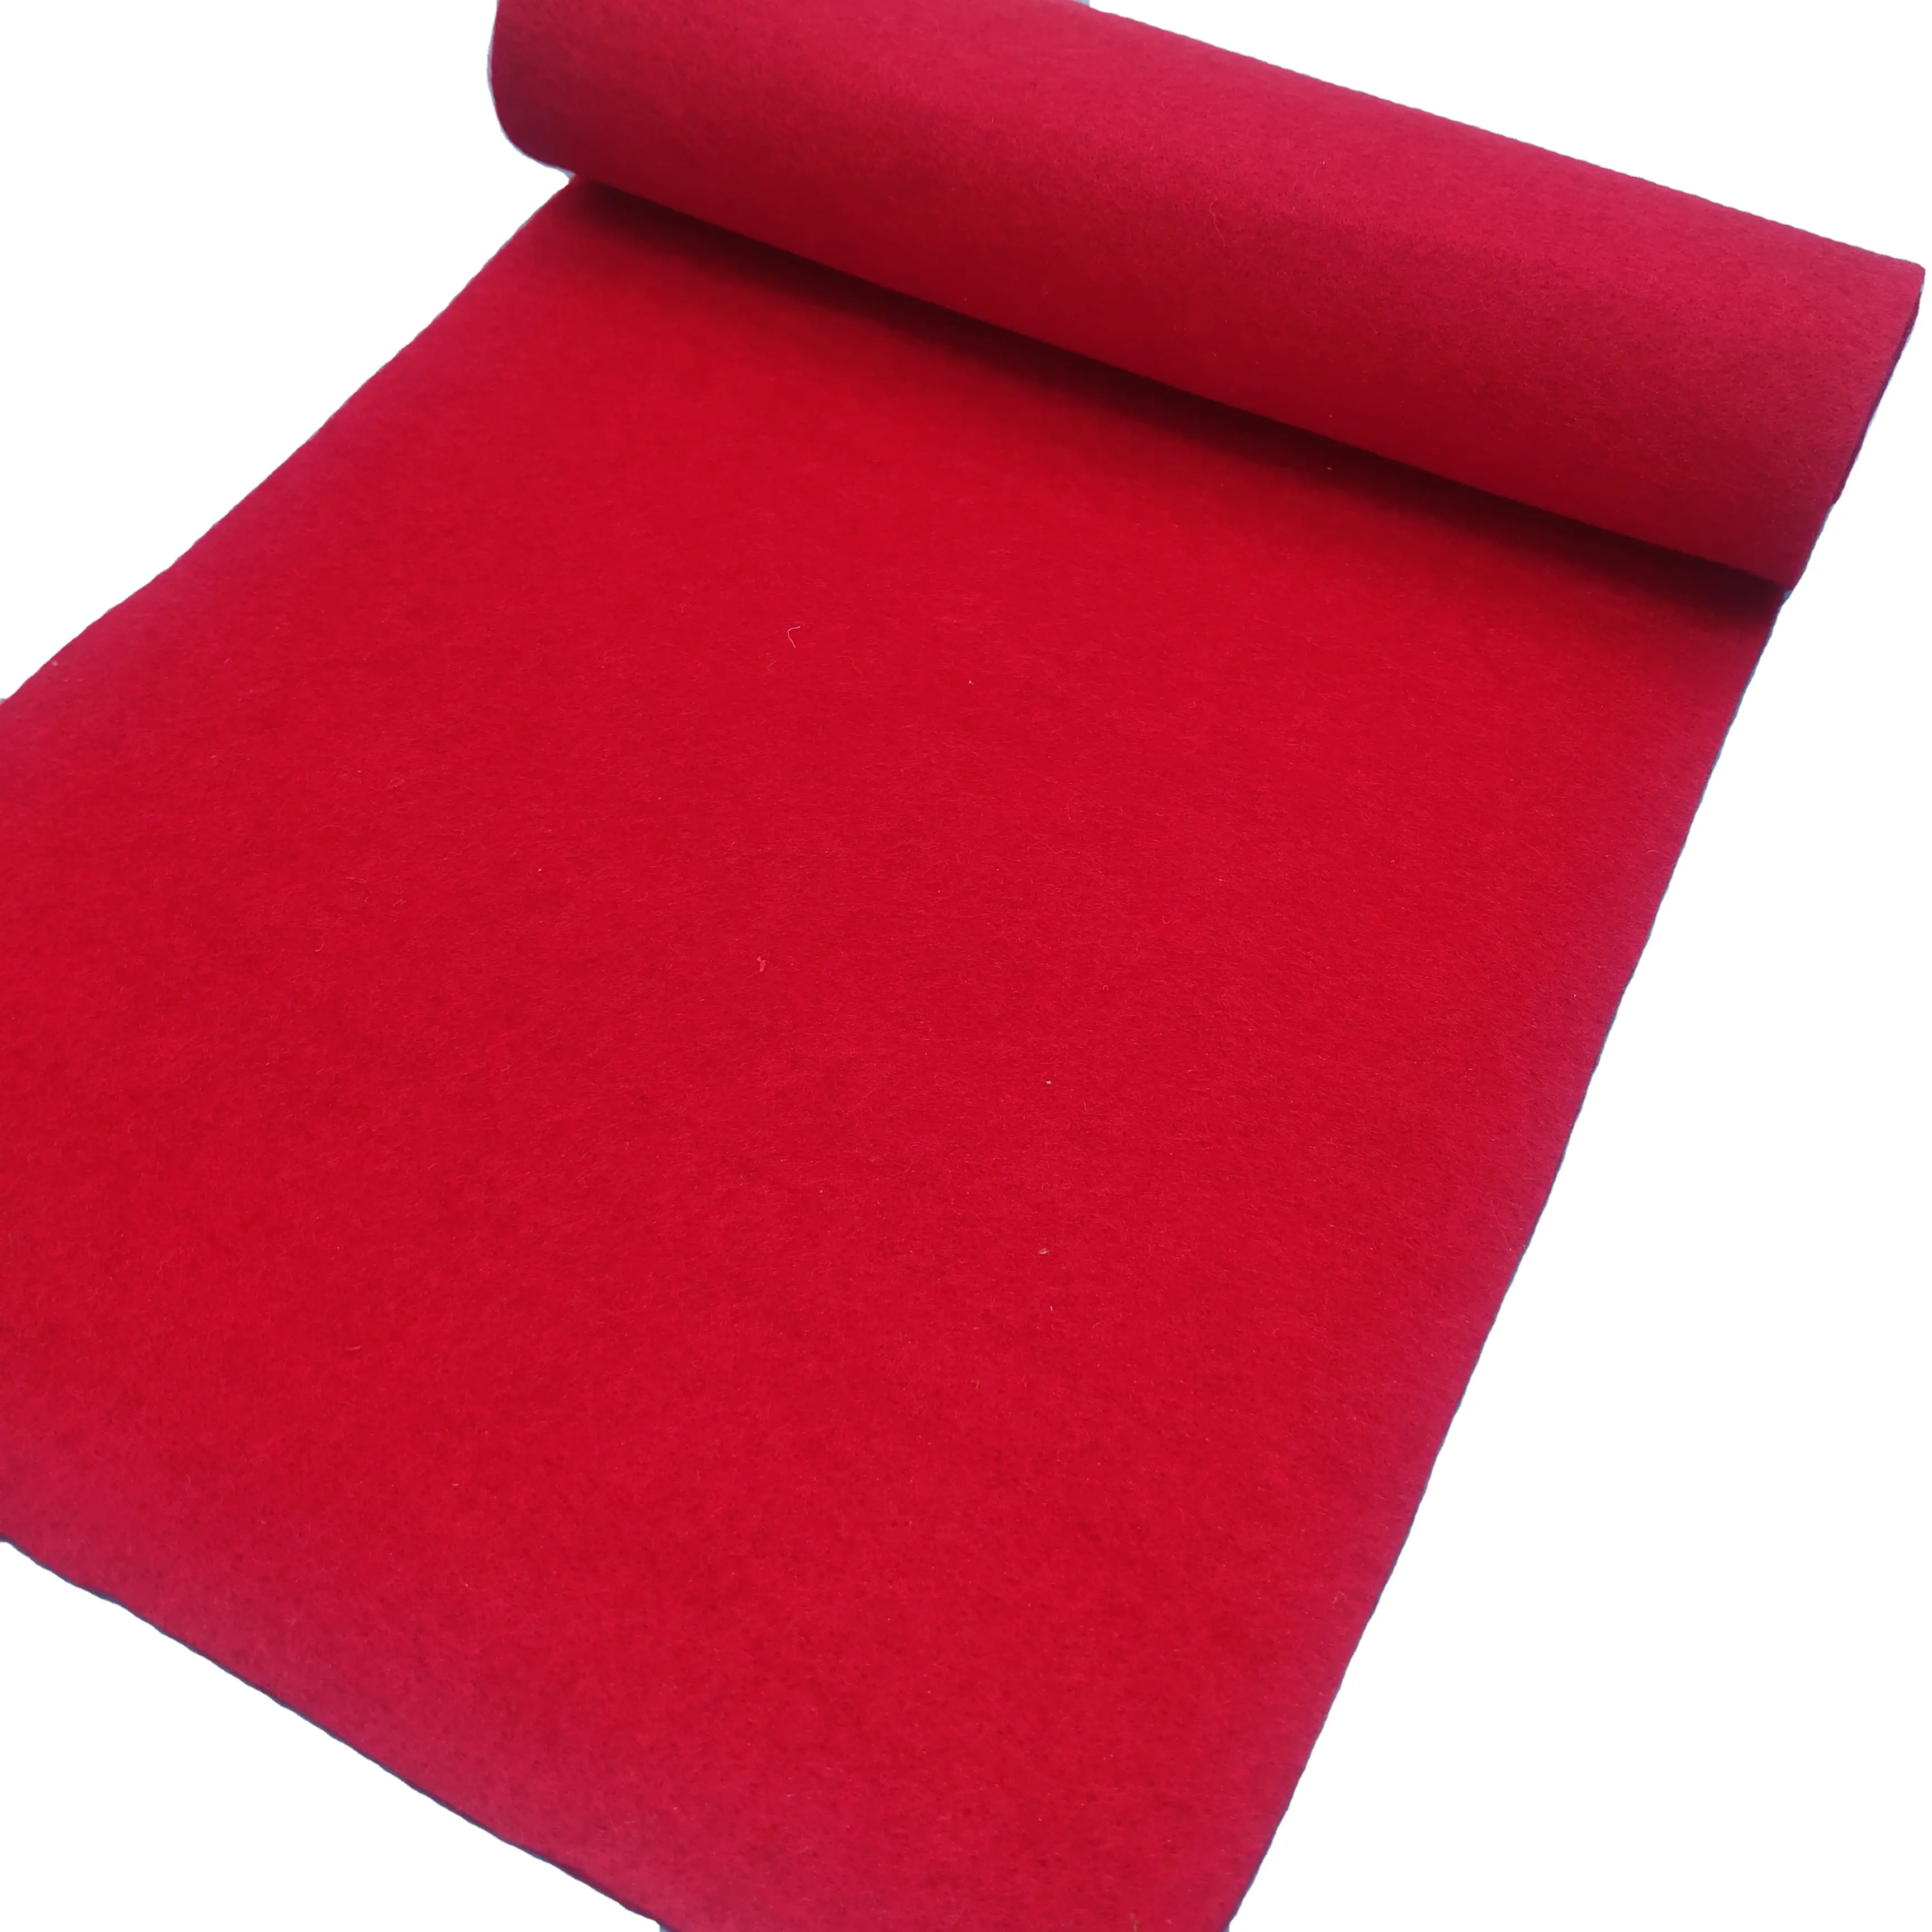 3x100 ft Plain Type Disposable Wedding Red Carpet Runner for Party Decorations, Special Events, Weddings